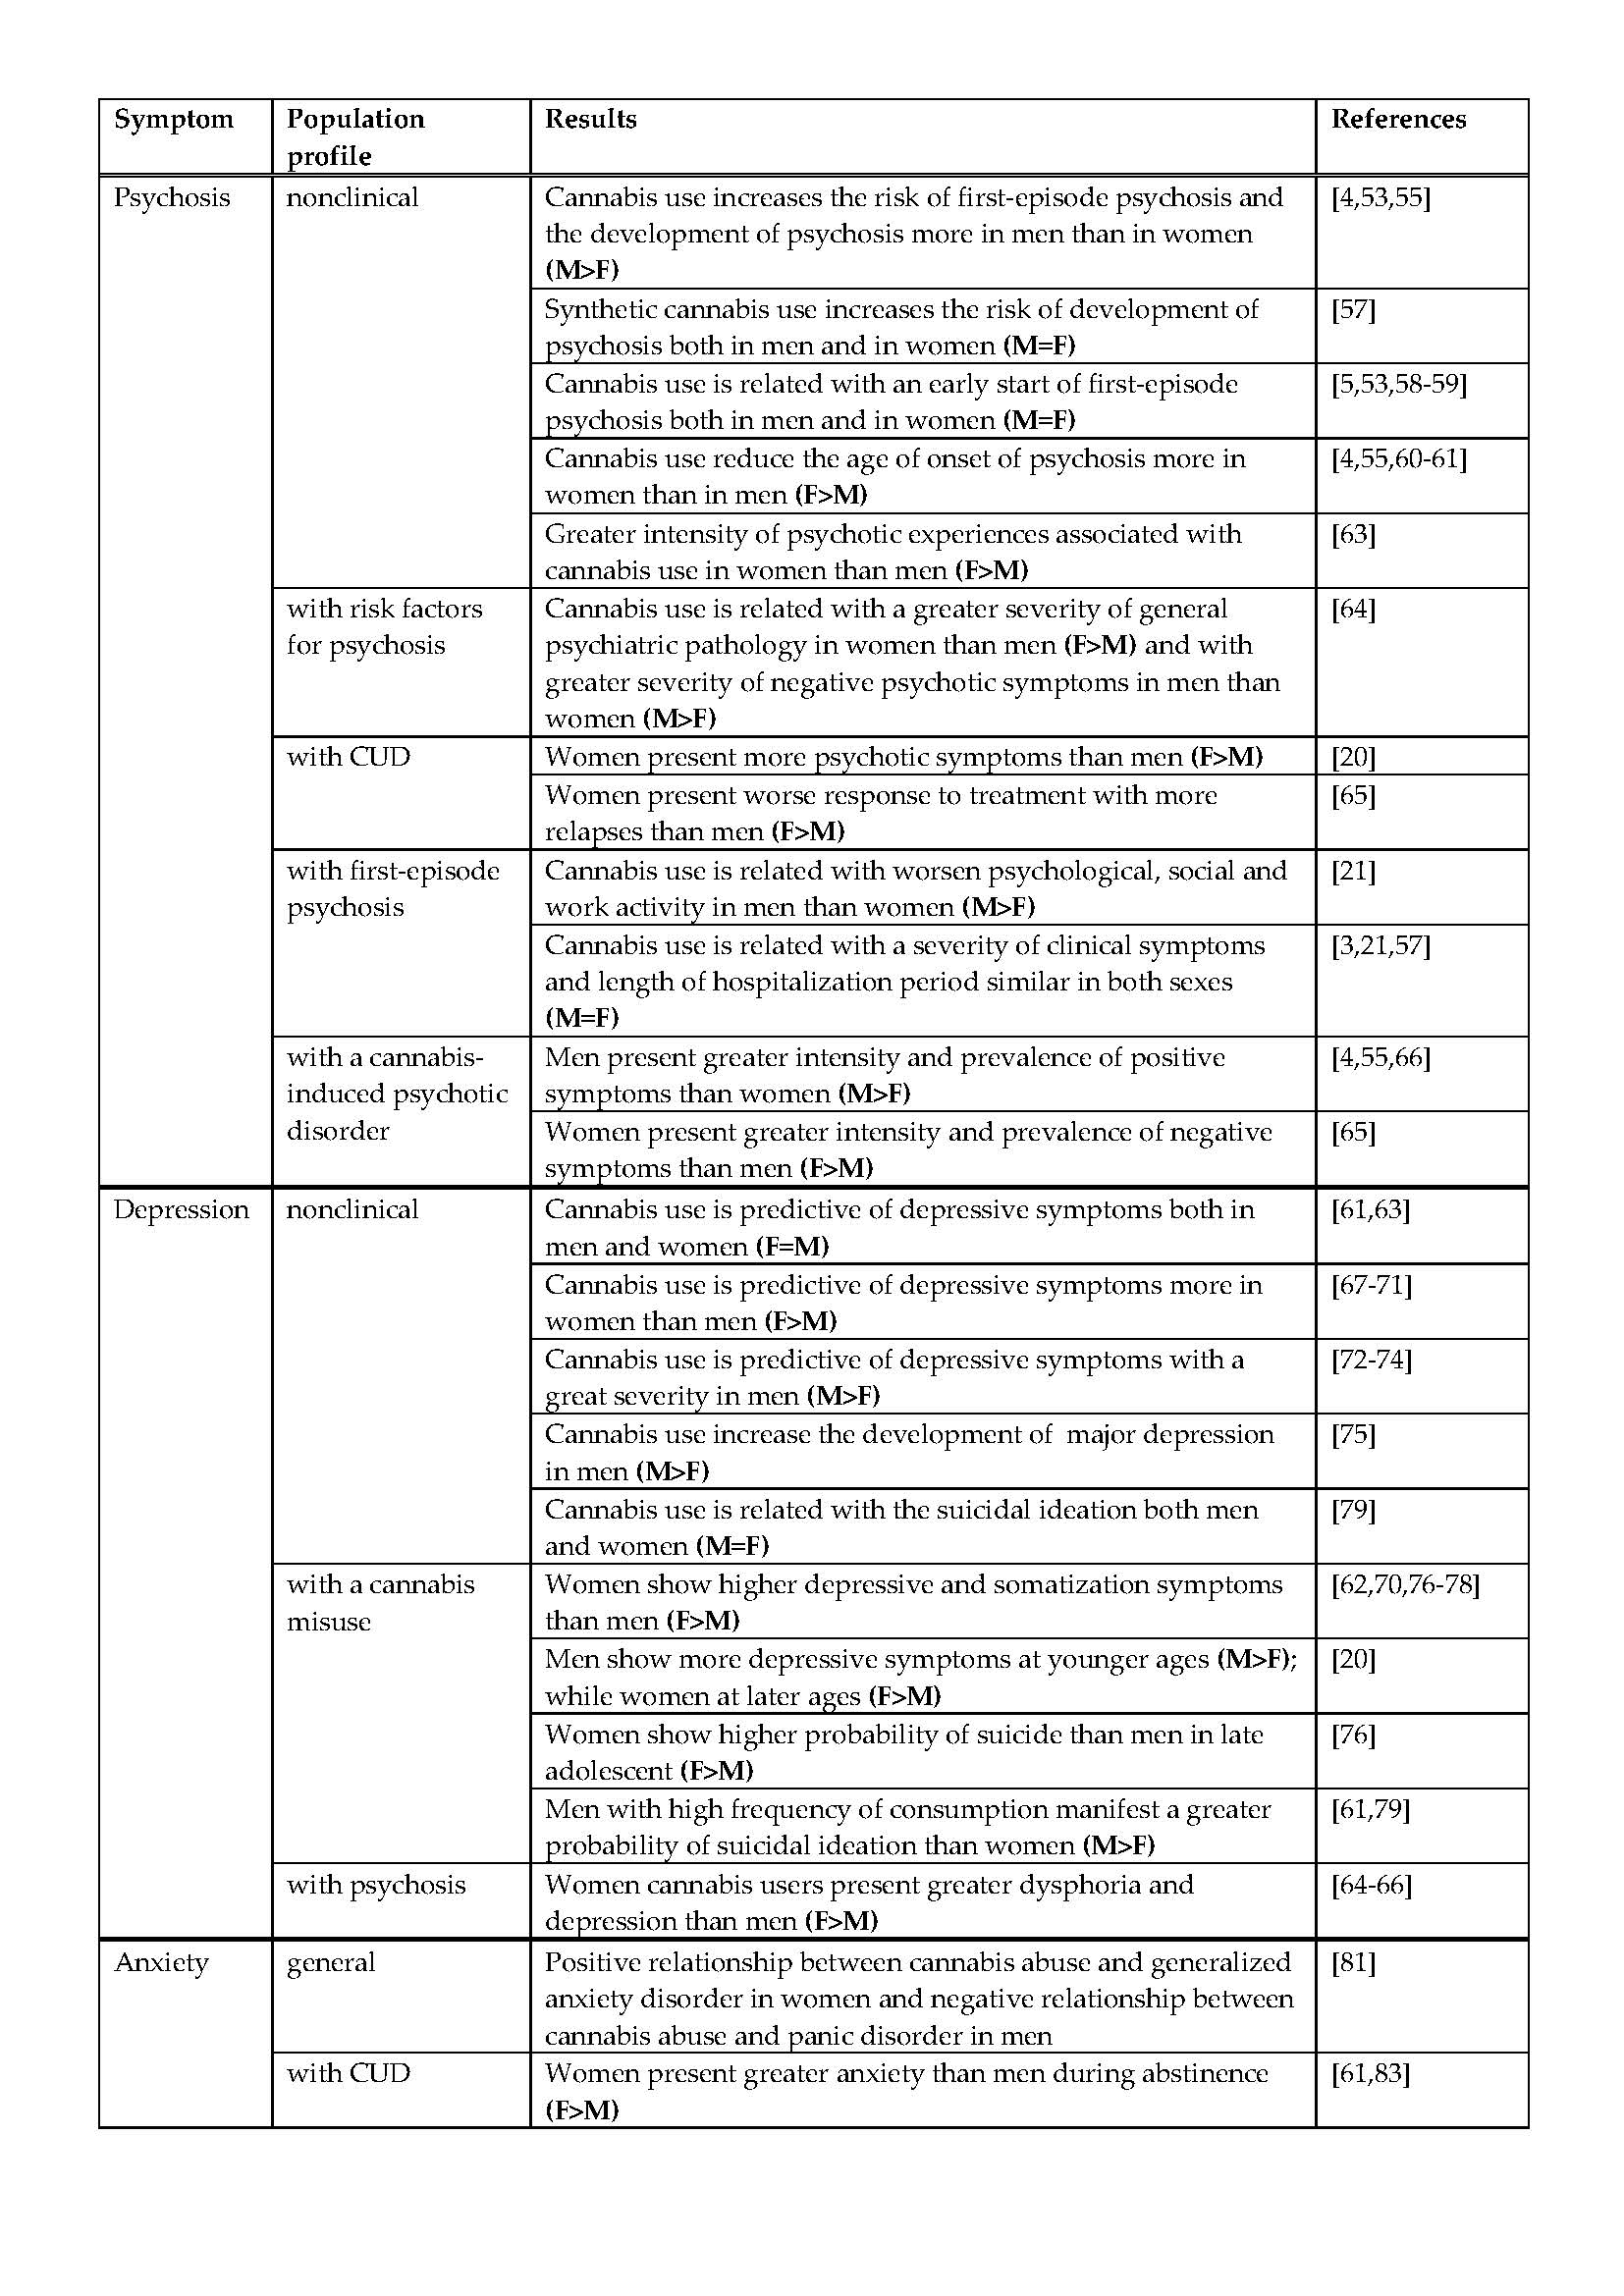 Table 1. The most important findings to date from the human literature on gender differences in the association between cannabis use and the development of psychotic, depressive and anxious symptoms. M: male; F: female; CUD: cannabis use disorder.